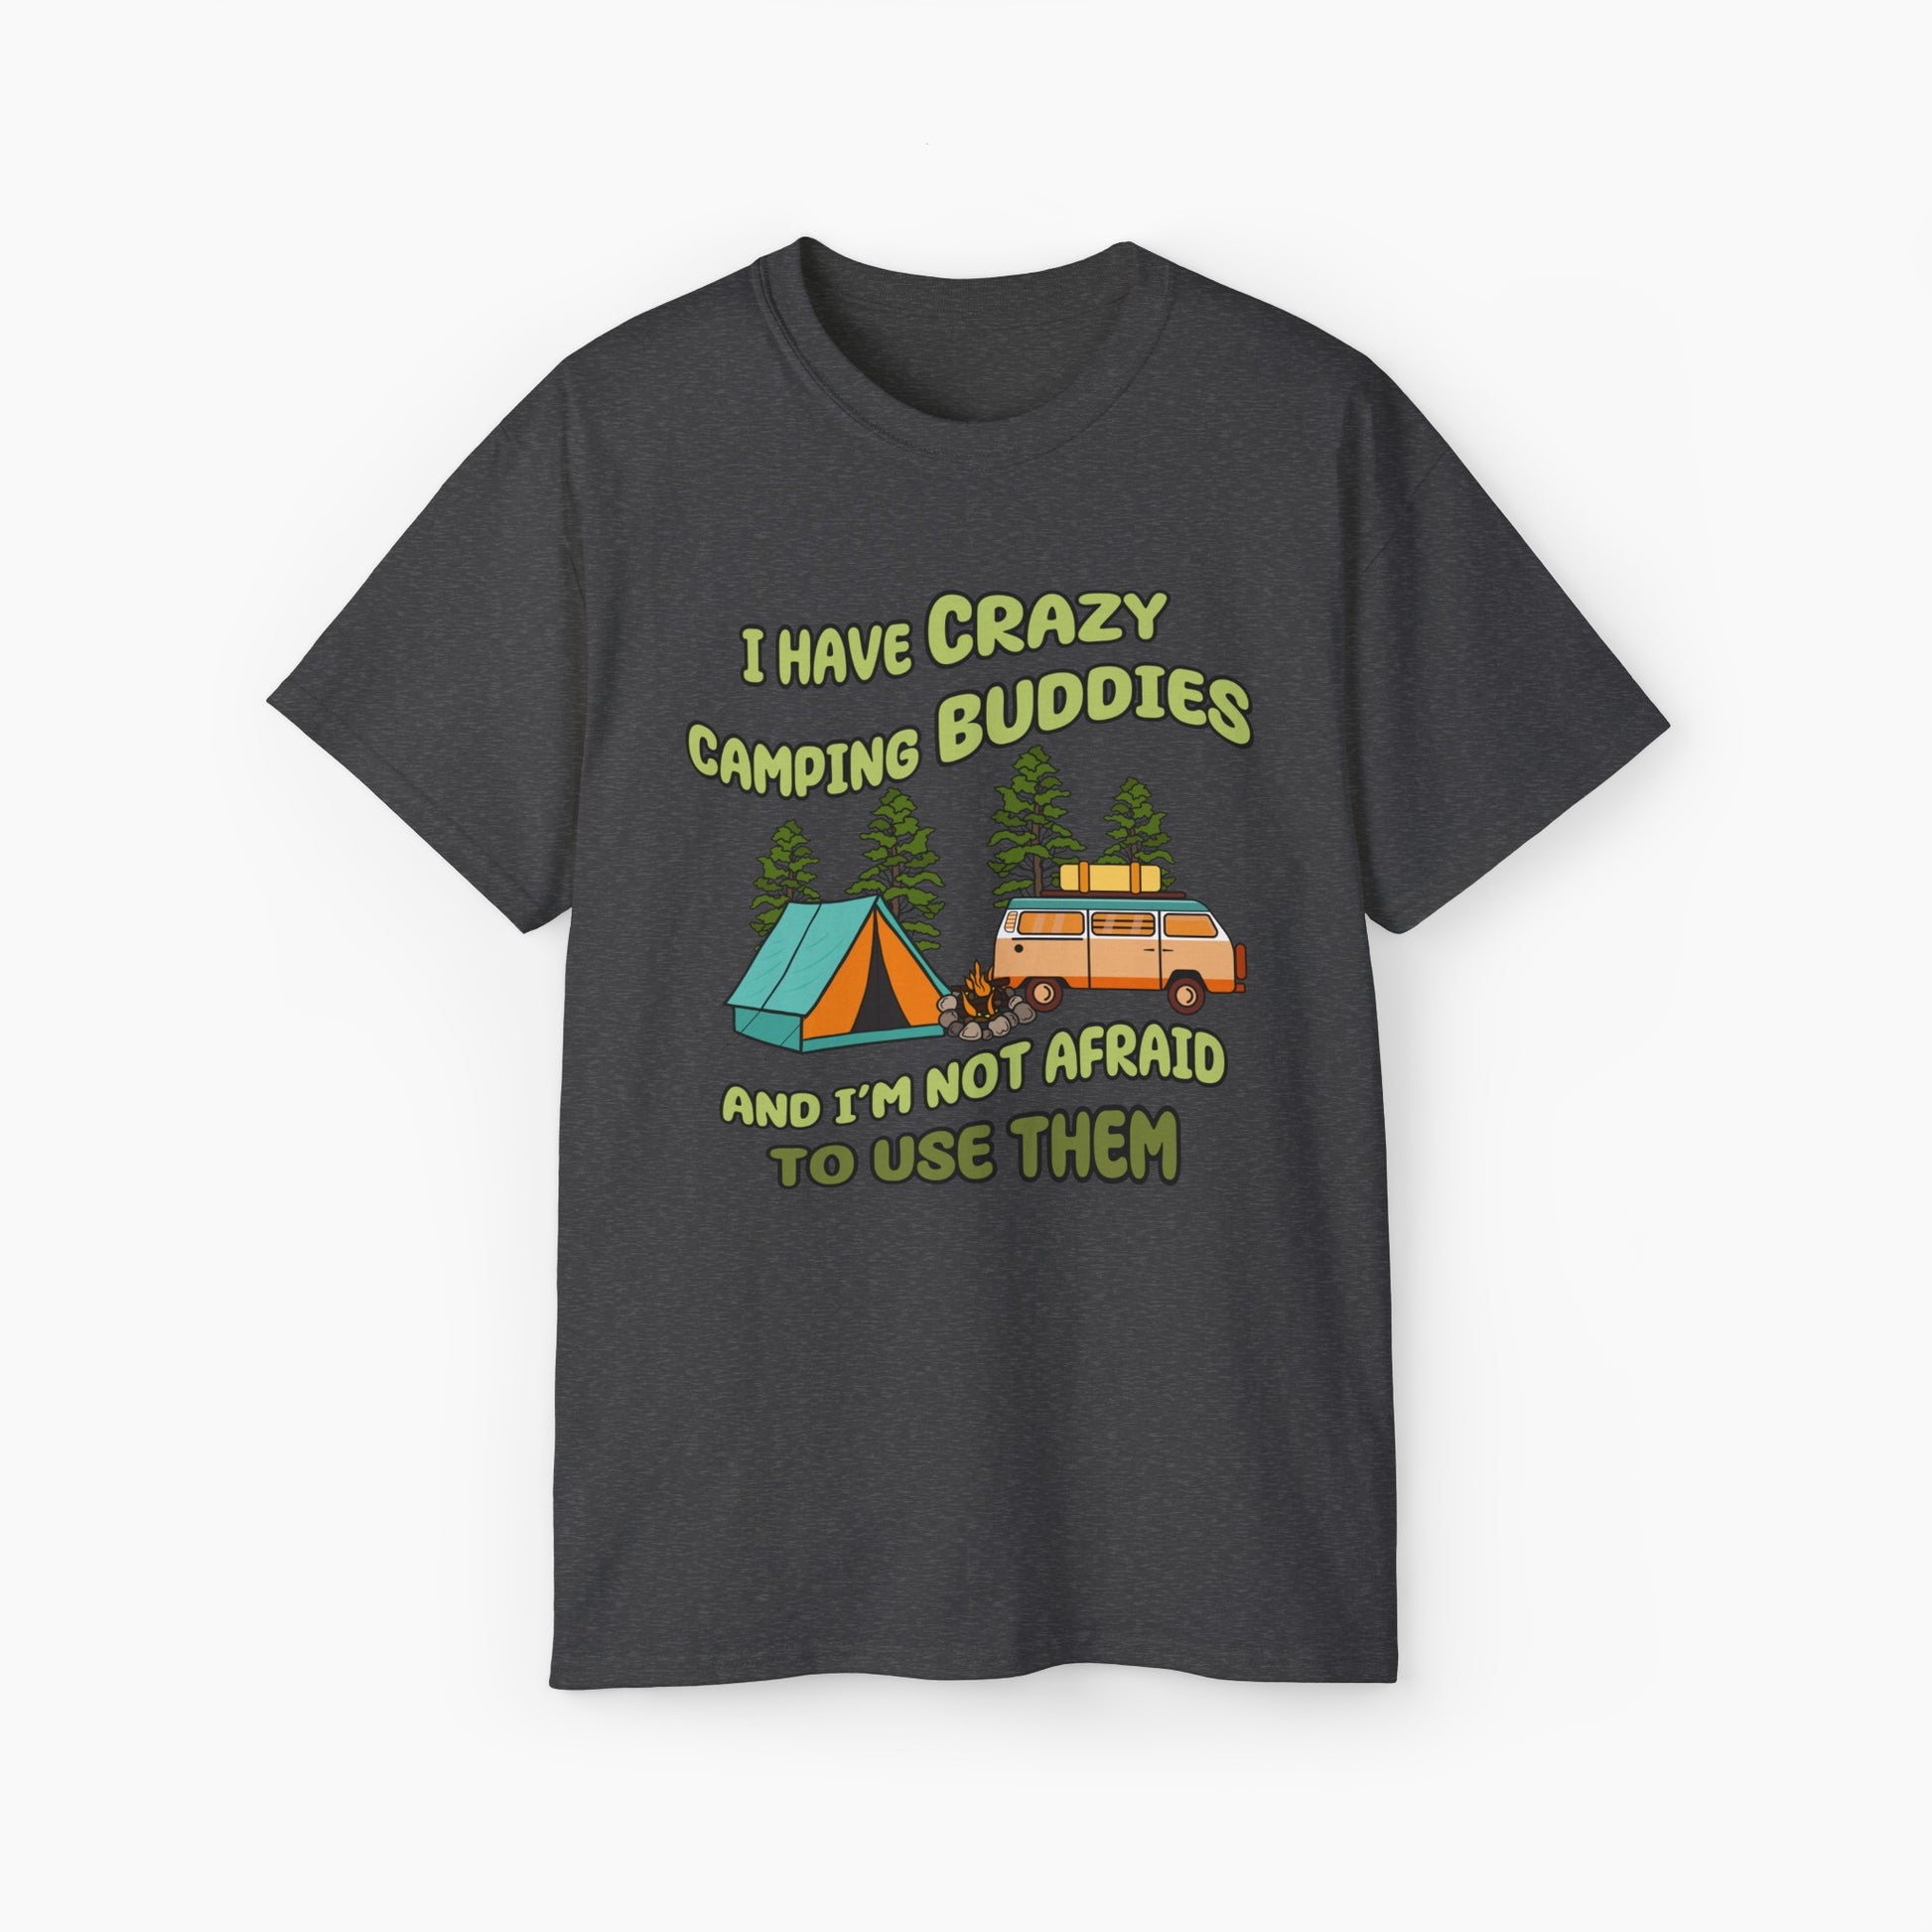 Dark heather grey t-shirt with the text 'I have crazy camping buddies and I am not afraid to use them,' featuring a camping van, campfire, trees, and a tent."